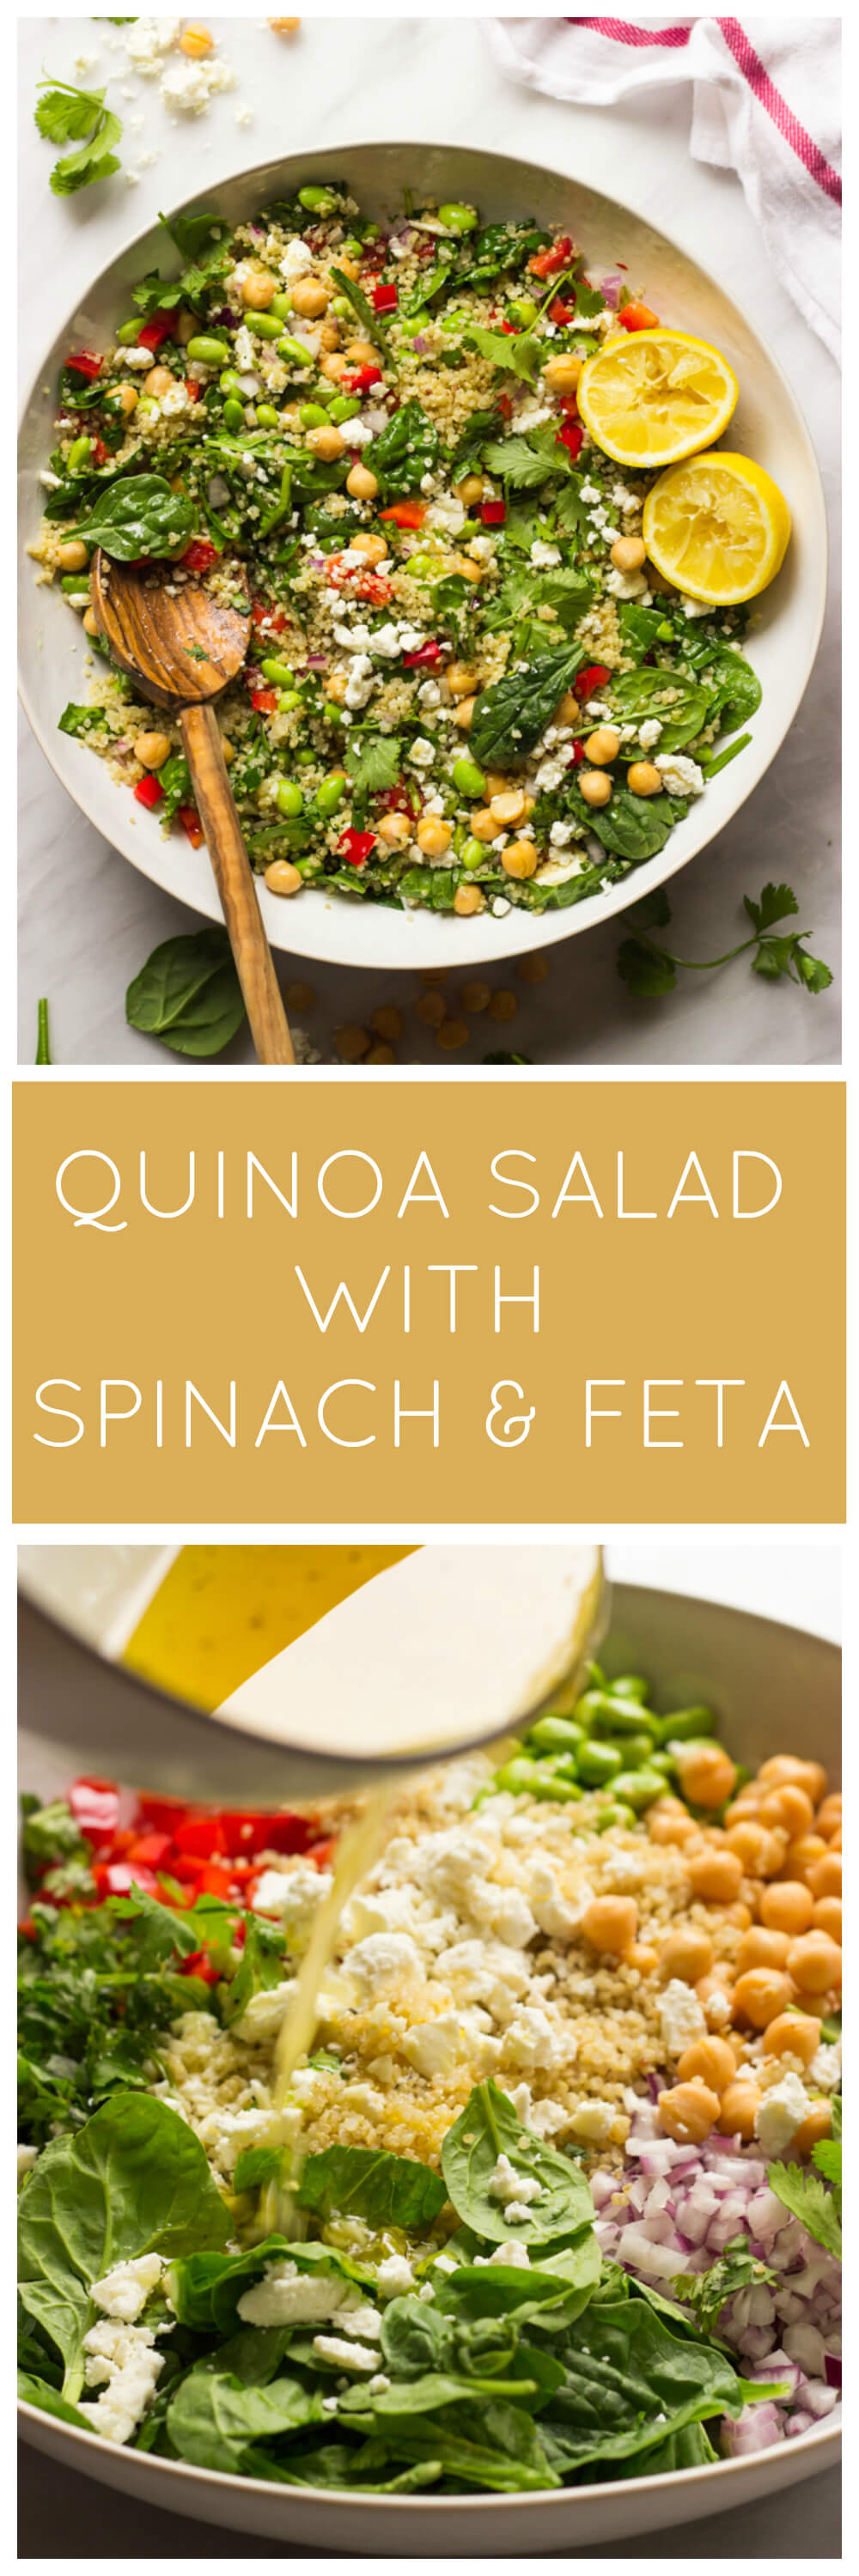 Quinoa Salad with Spinach and Feta - packed with crisp veggies and the most delicious lemon ginger dressing! This quinoa salad make the perfect summer side | littlebroken.com @littlebroken